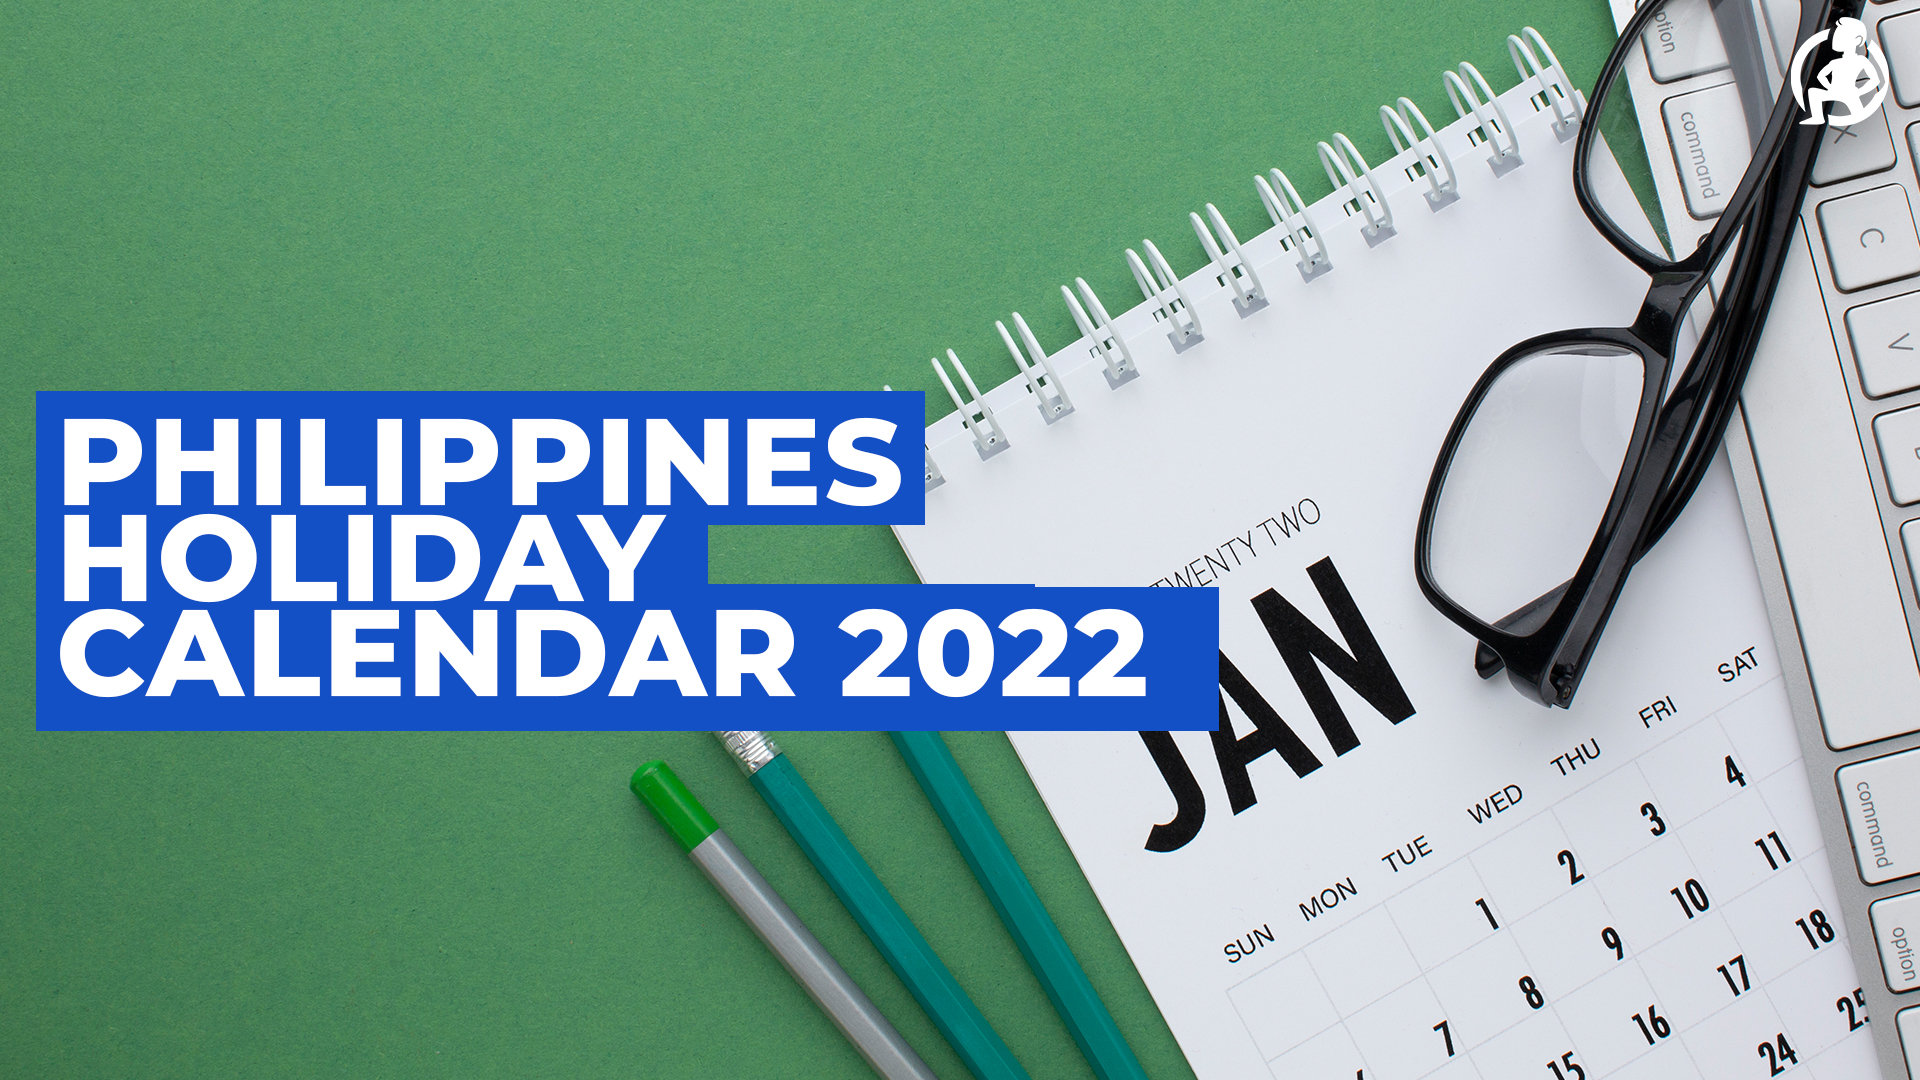 The Philippines Holiday Calendar for 2022 – Practical Advice